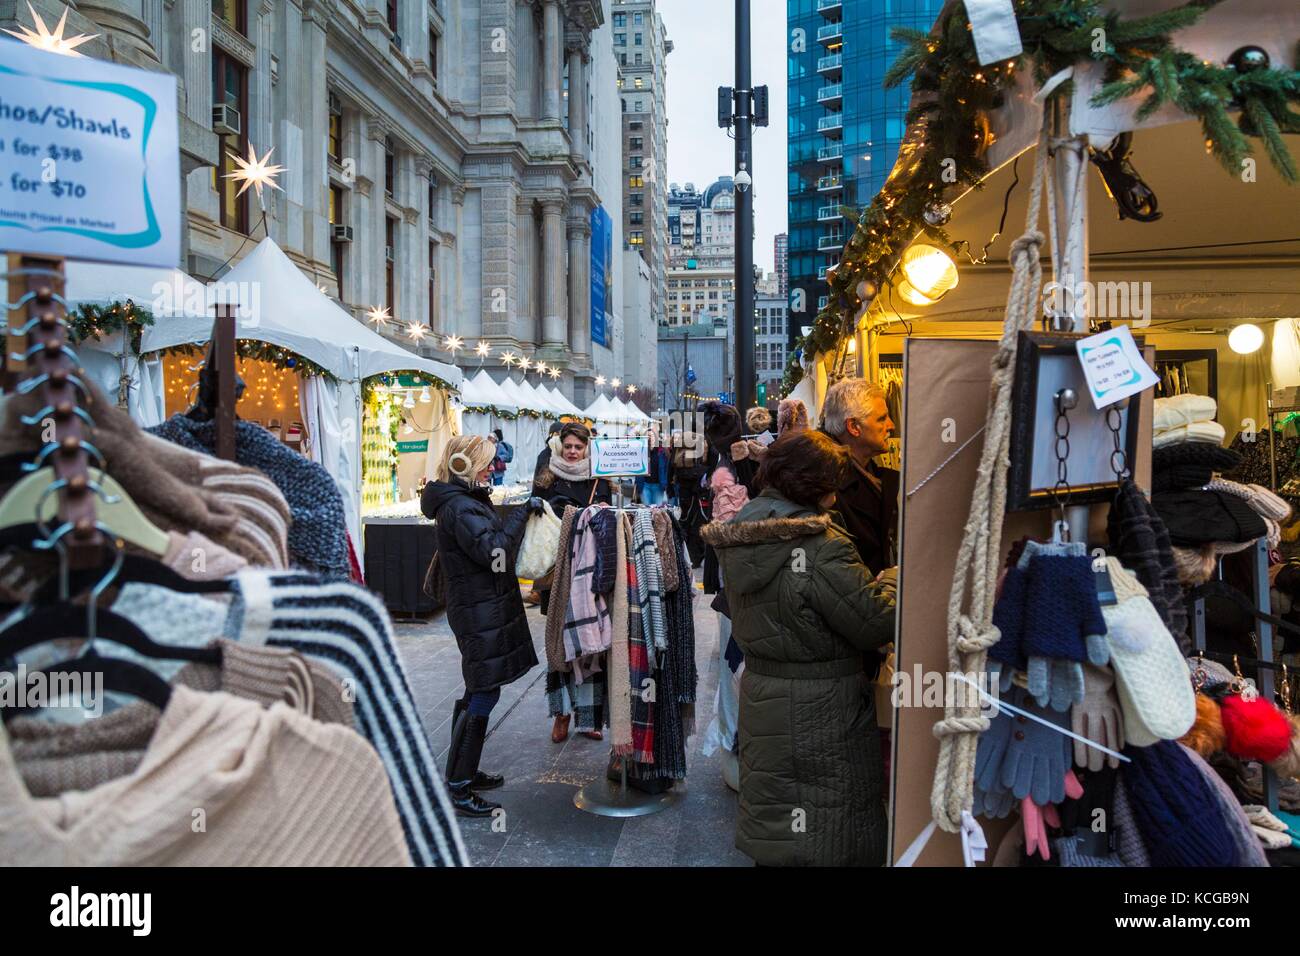 Christmas Village and Winter garden at Dilworth Park outside of City Hall, Philadelphia, PA, USA. Stock Photo